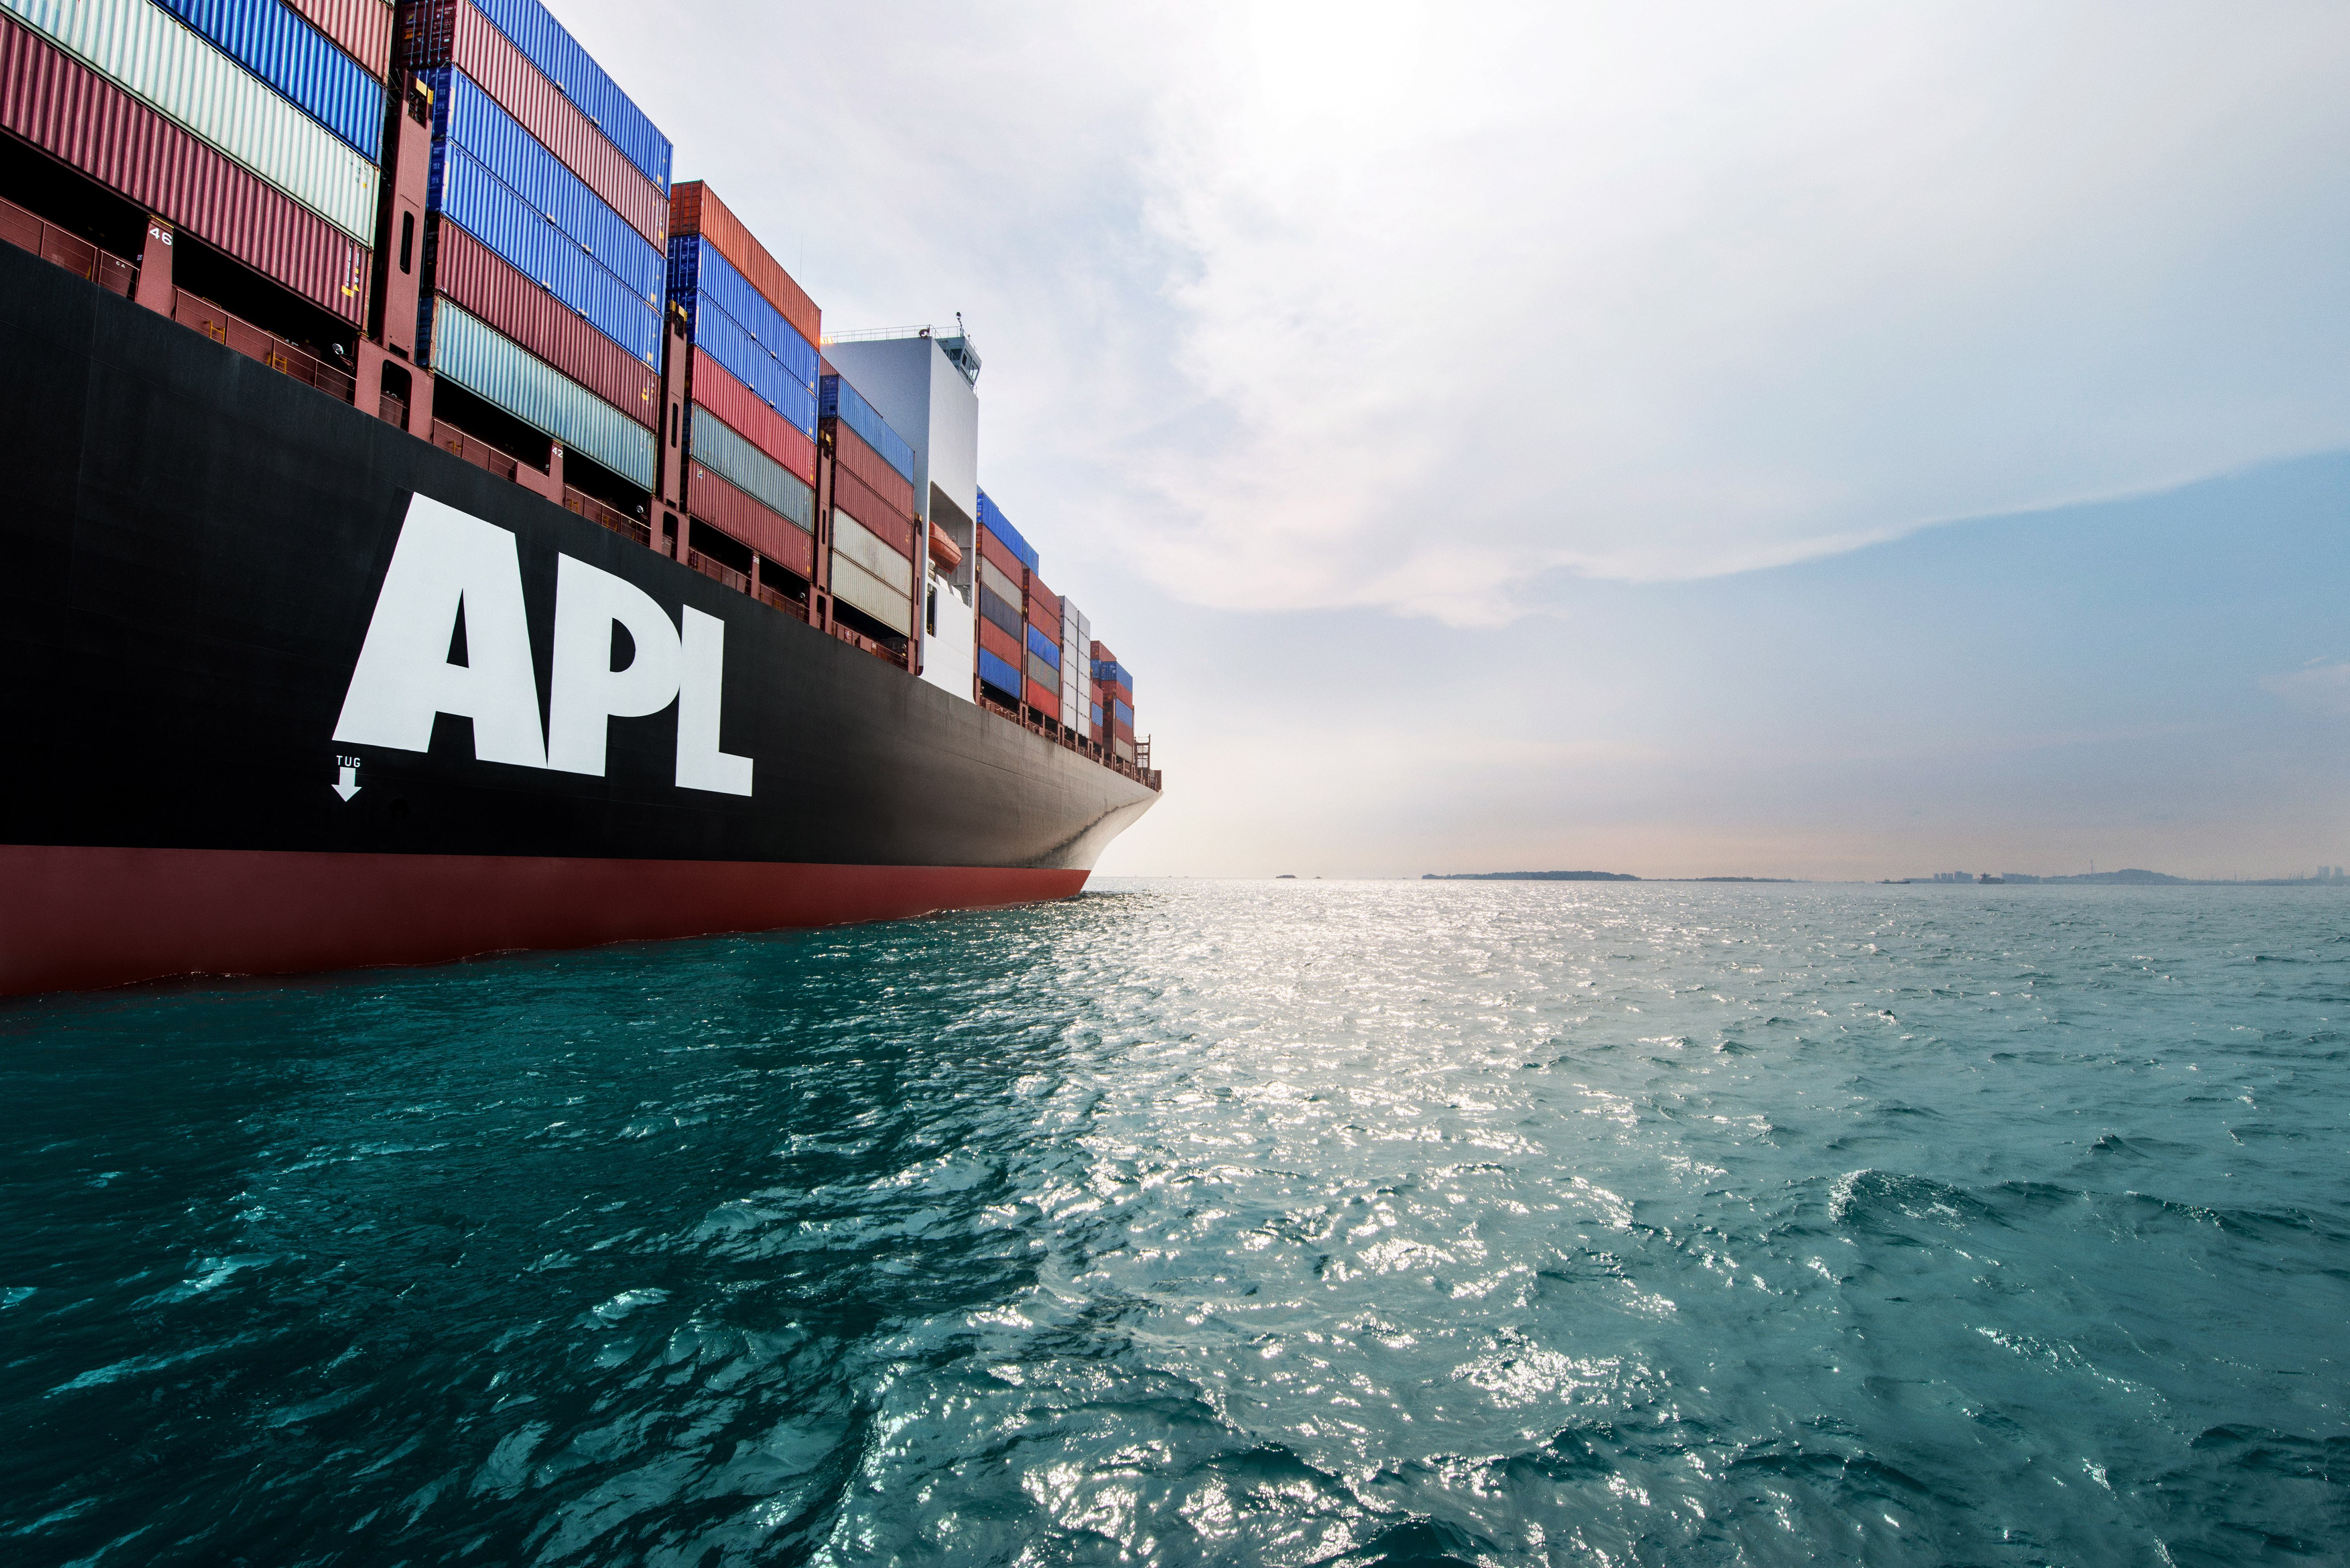 APL Co. Pte Ltd – Change of Name with effect from 1 December 2020